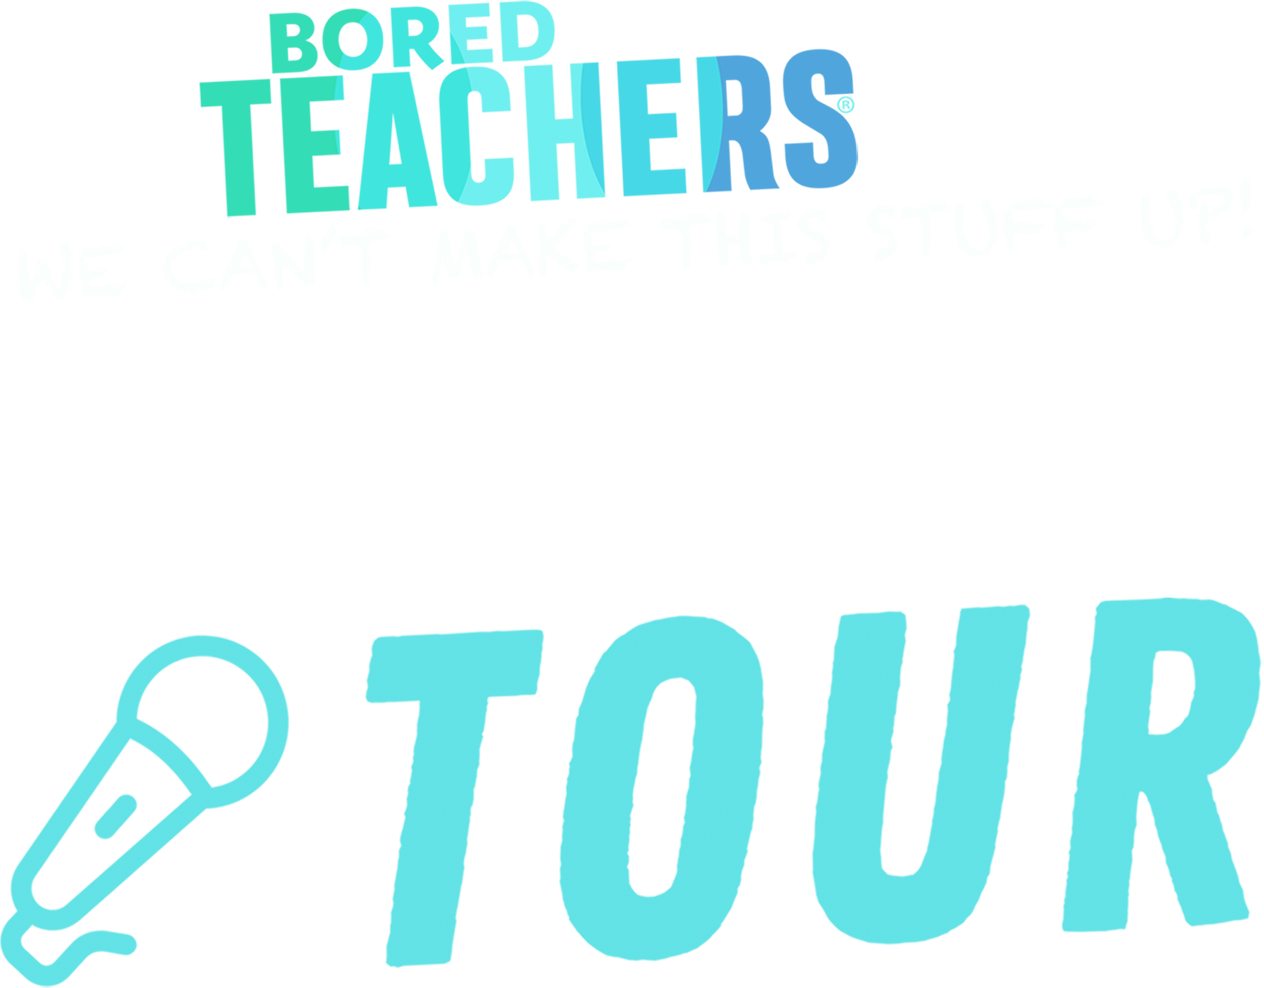 The Bored Teachers "We Can't Make This Stuff Up!" Comedy Tour Bored